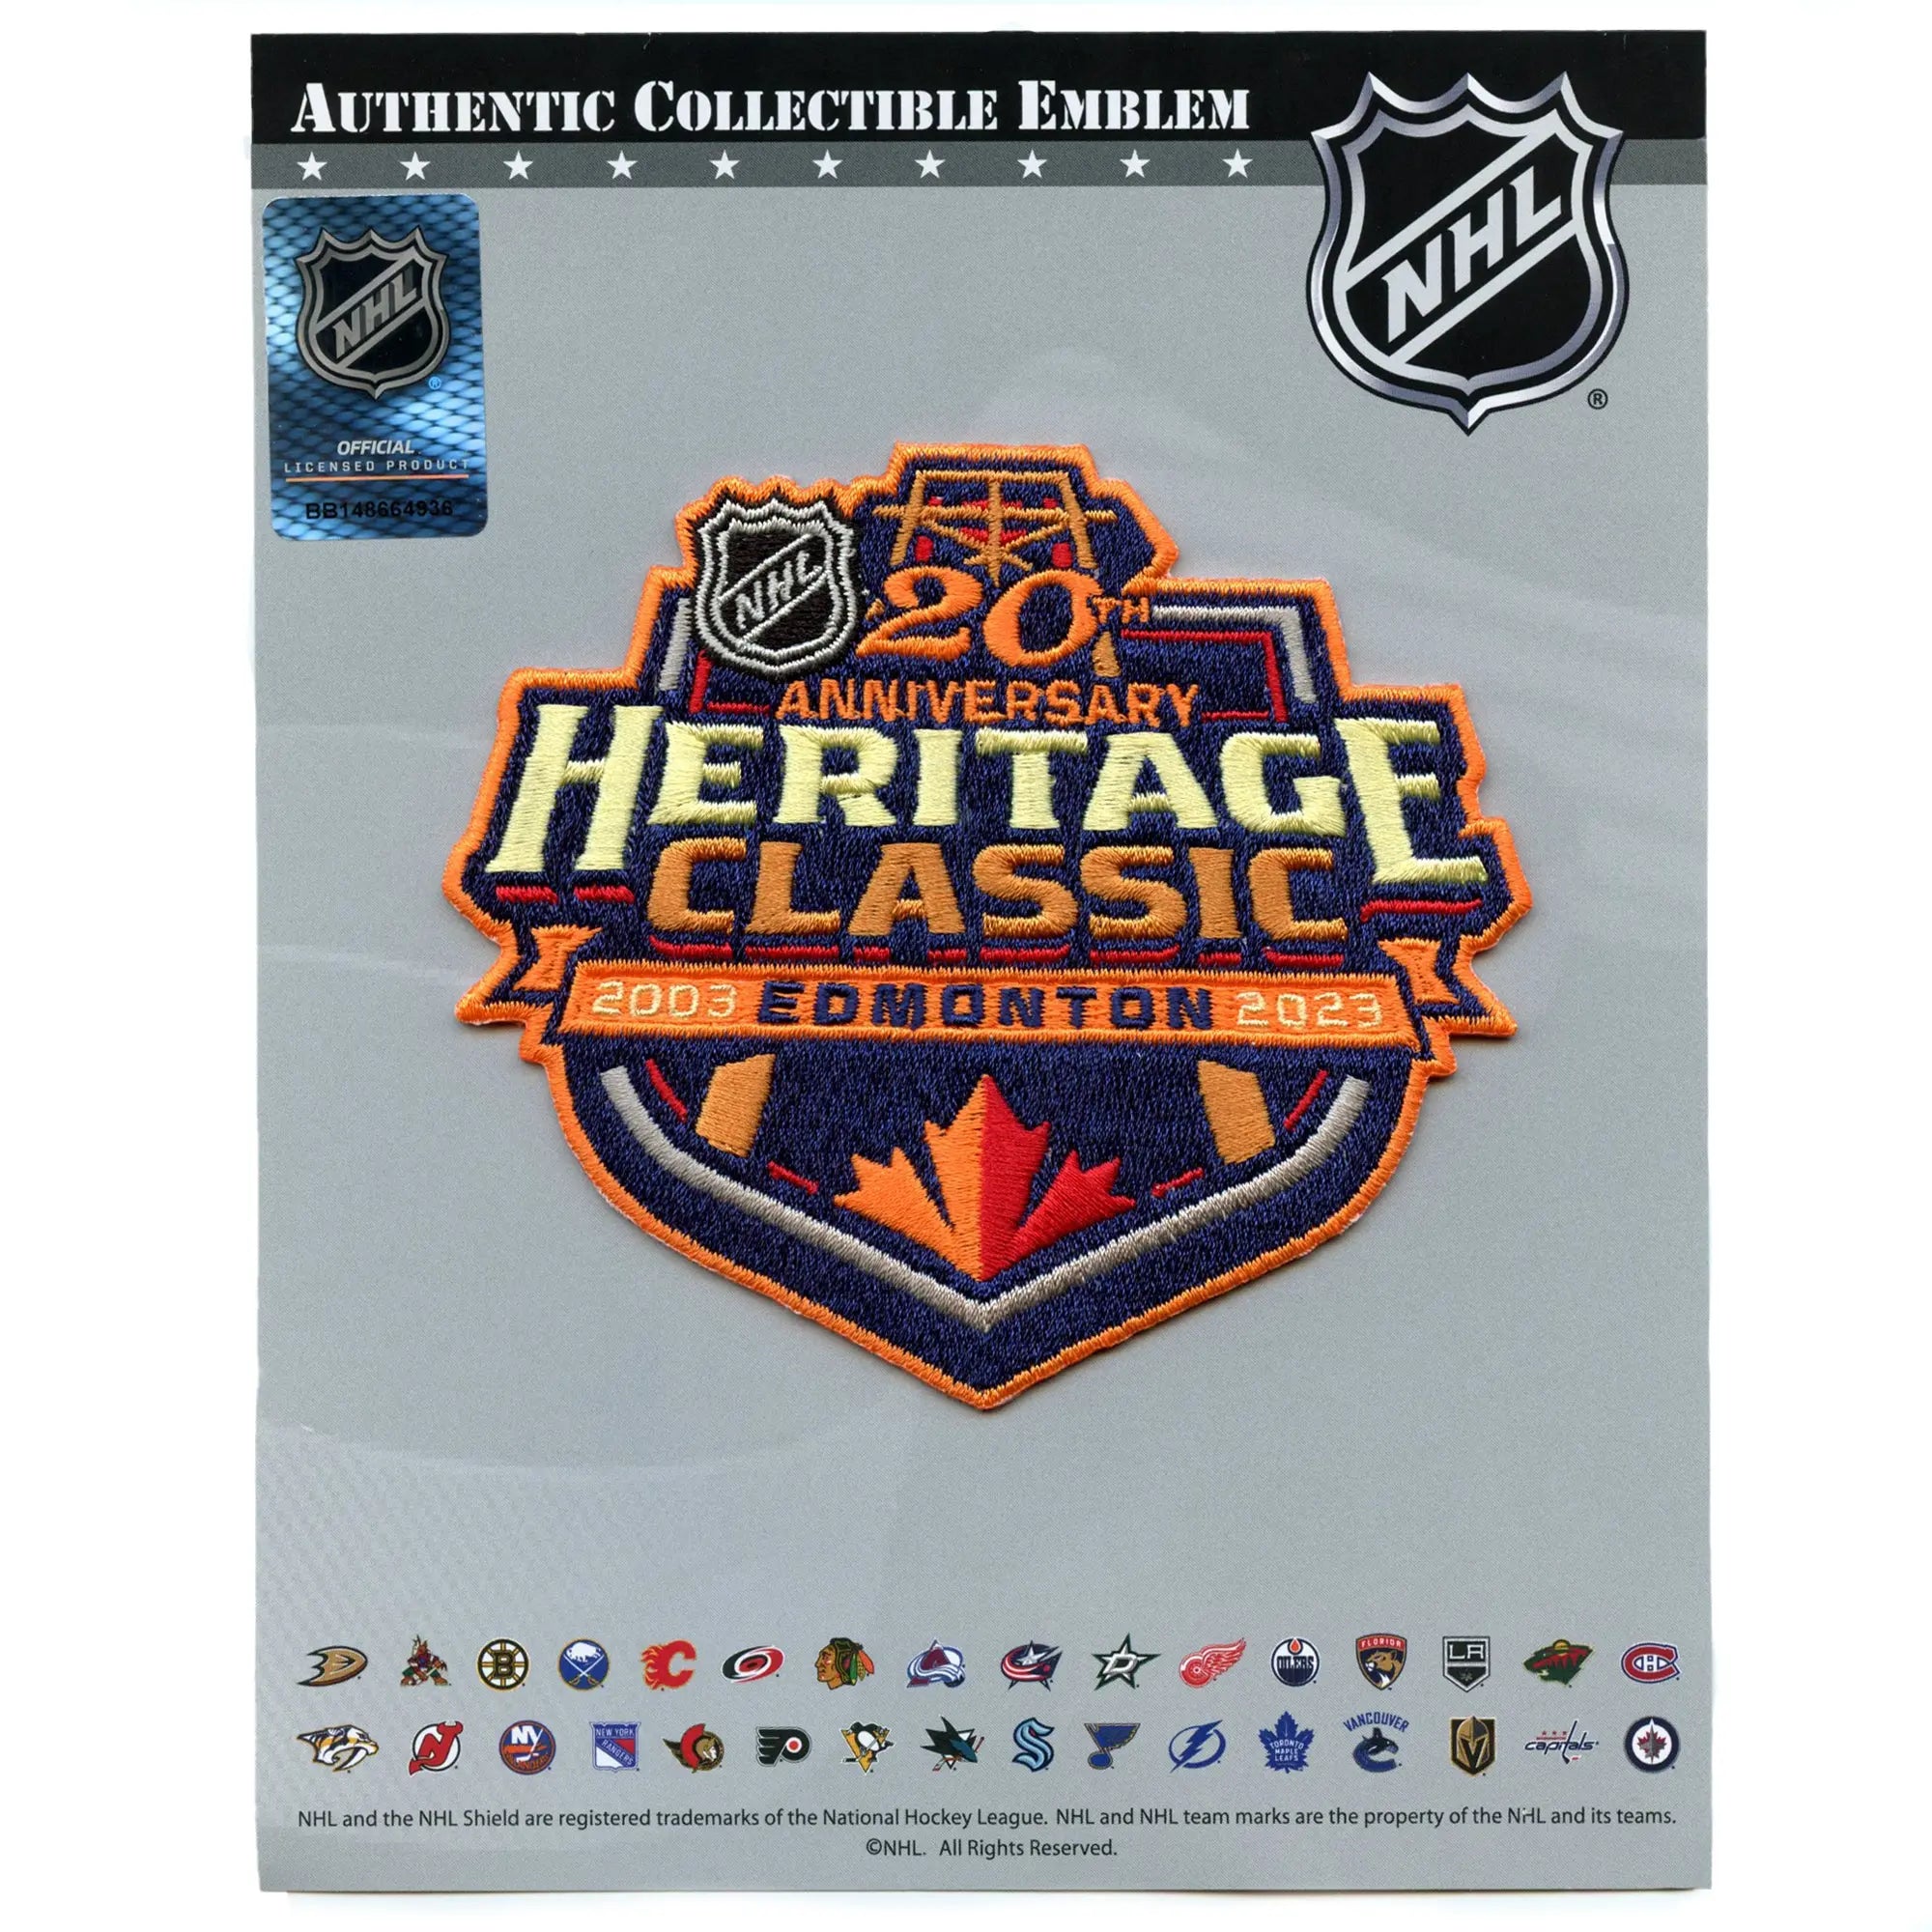 Three Must-Haves for the Heritage Classic's Return to Edmonton